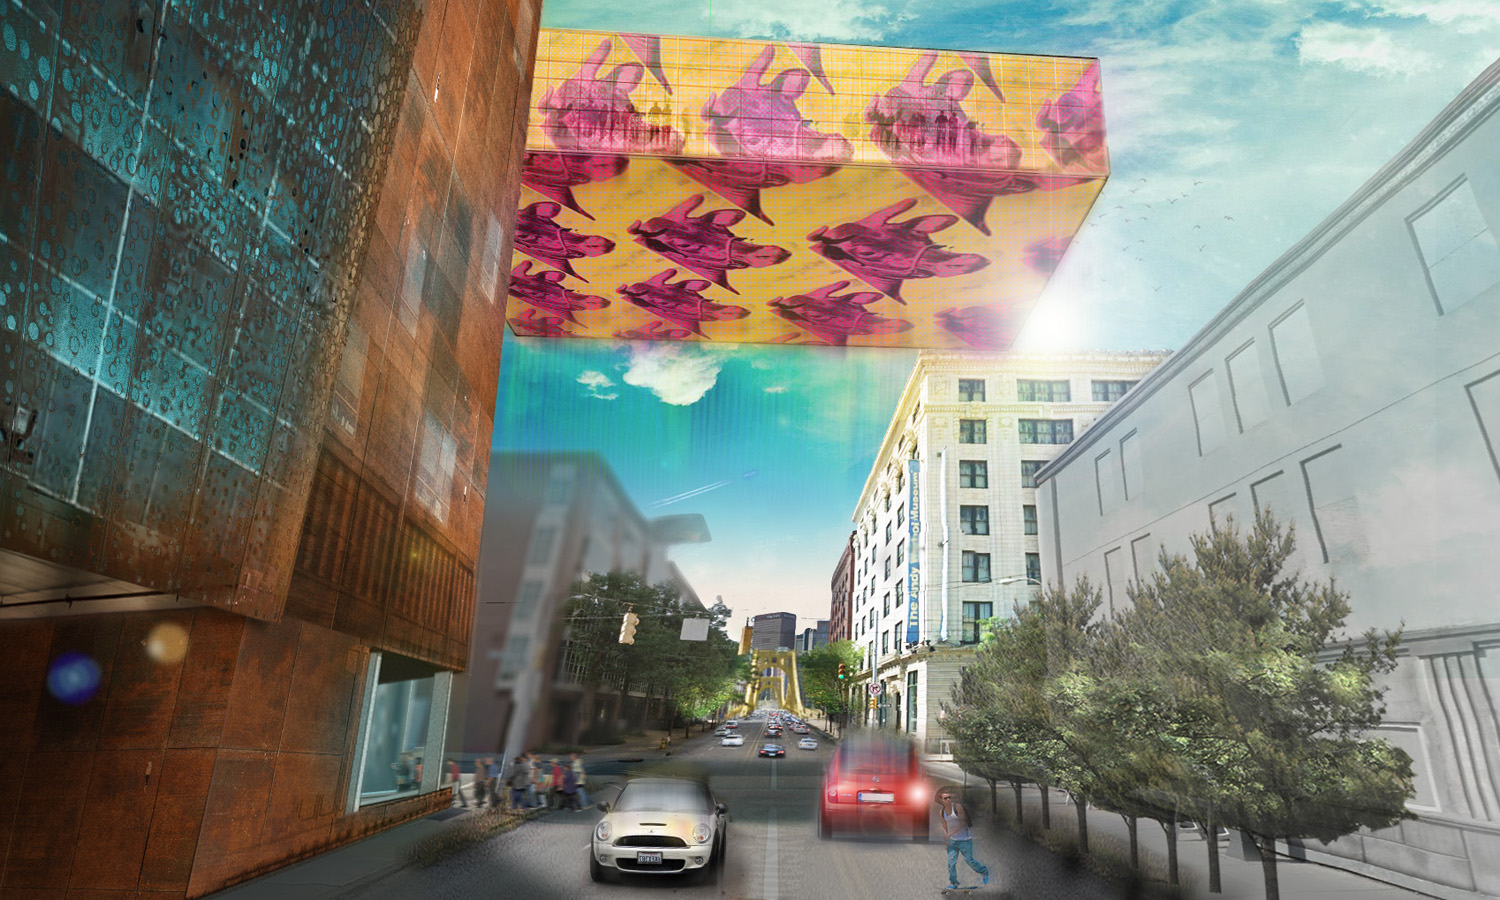  concept rendering for Warhol Museum Hotel 